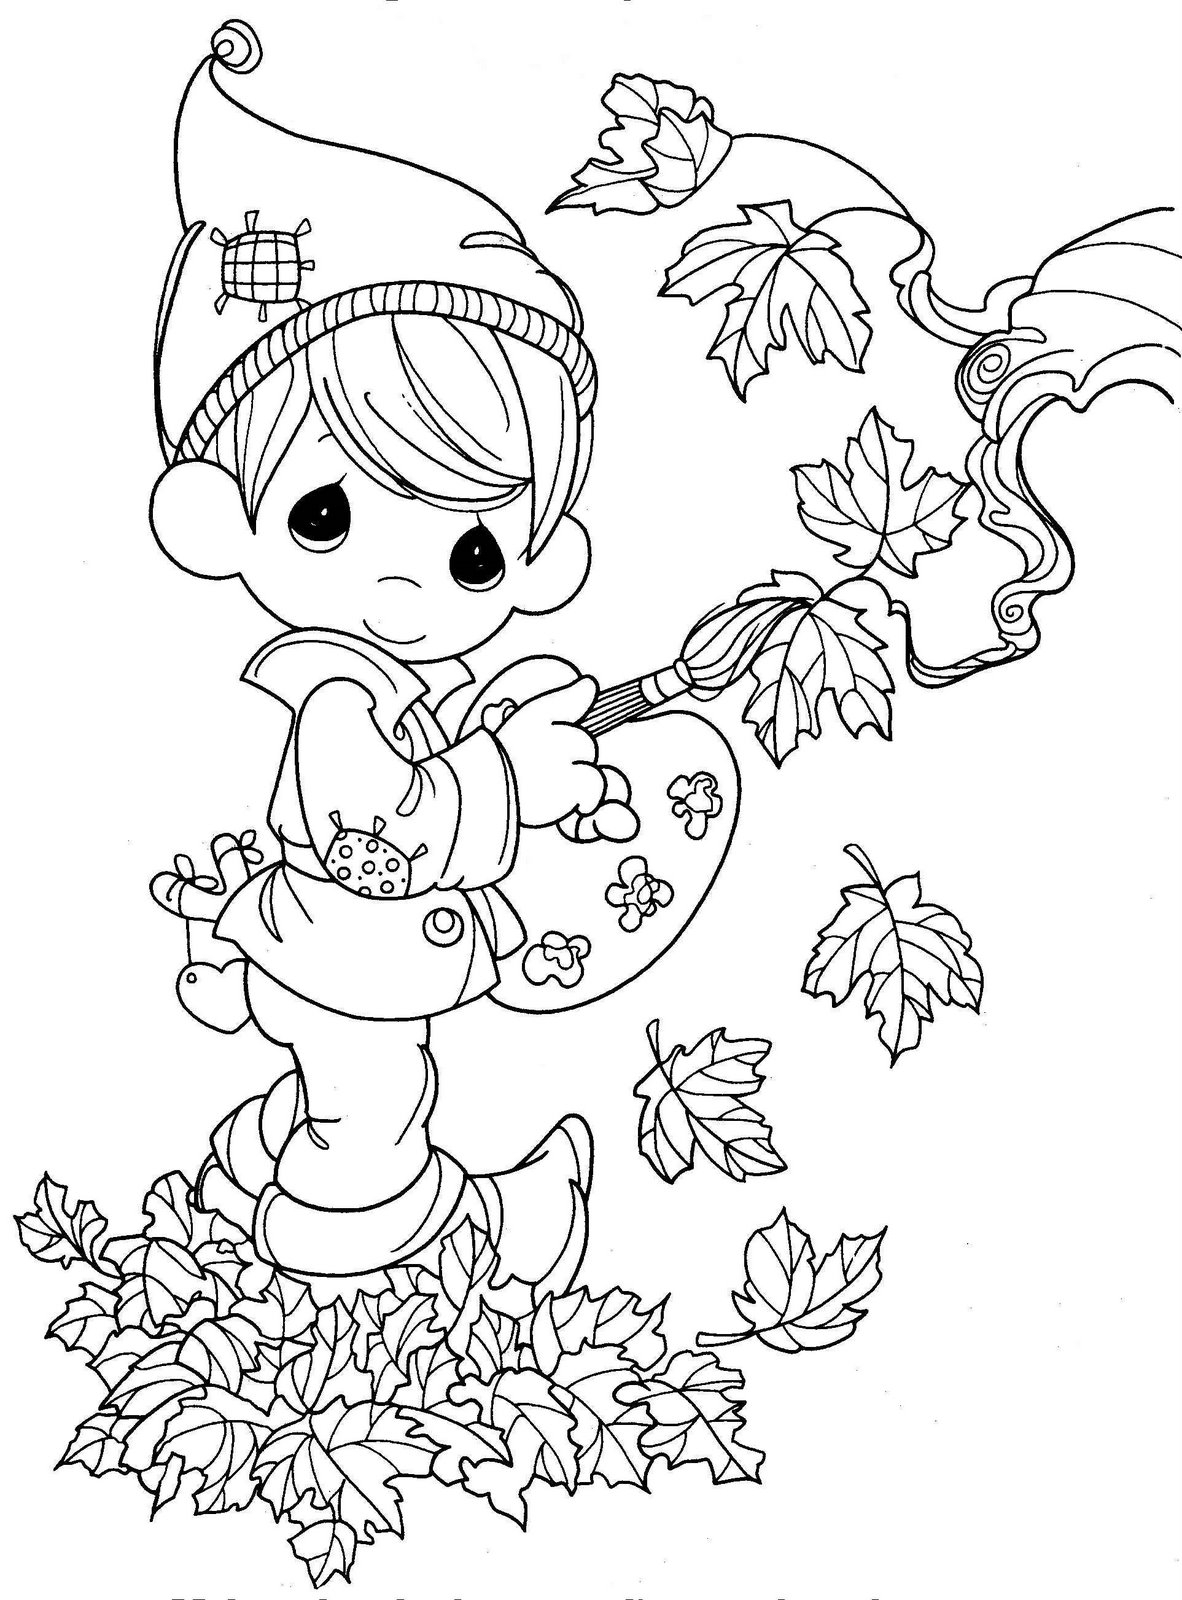 Fall Coloring Pages Free Free Printable Fall Coloring Pages For Kids Best Coloring Pages